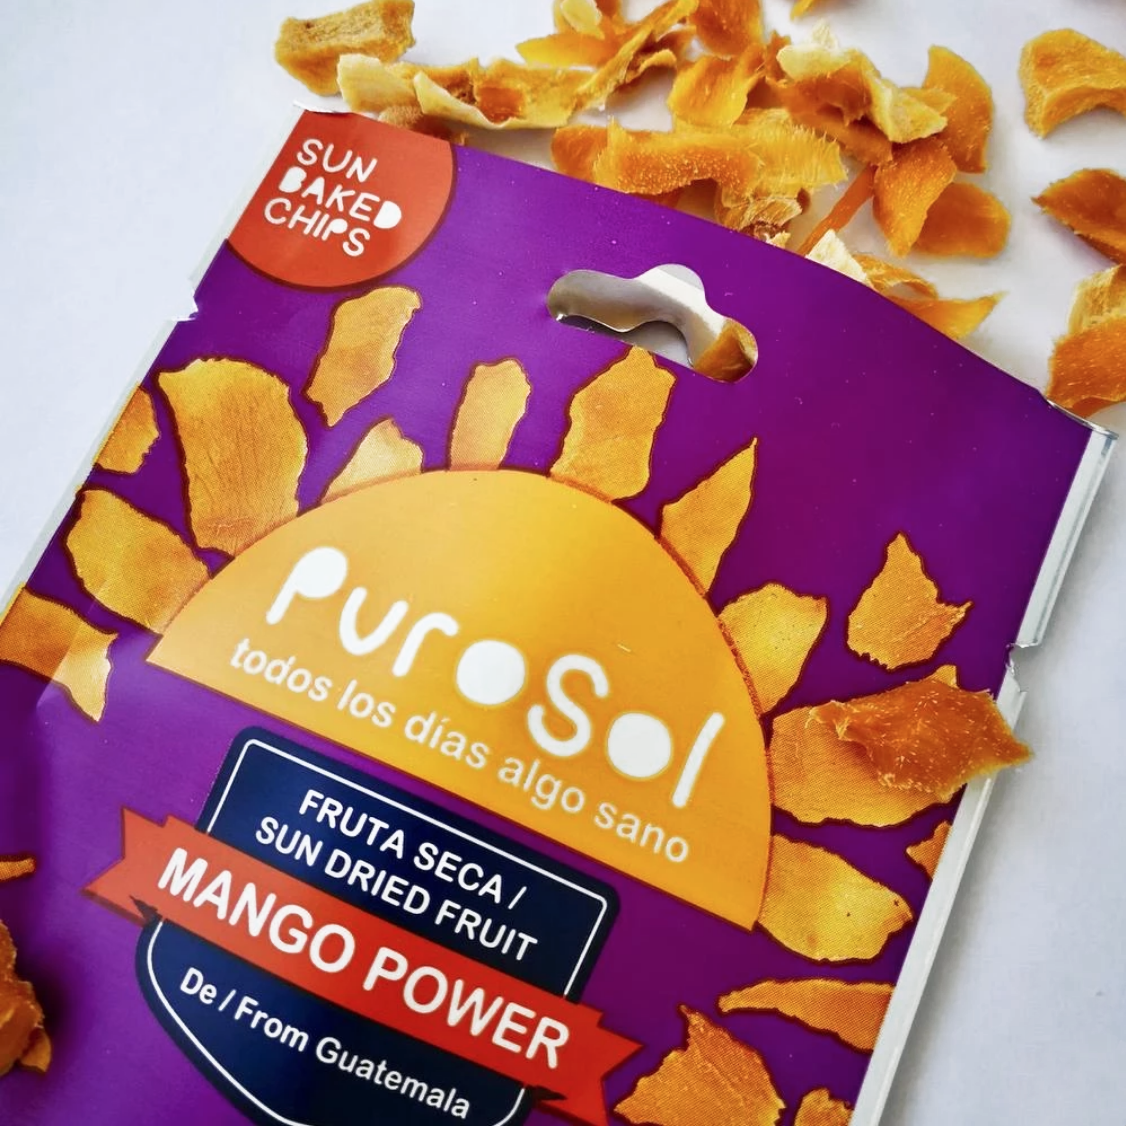 Wholesale Mango Power from PuroSol (Box of 4.56 Kgs)-healthy snacks sun-dried in Guatemala, dehydrated fruits and herbs for all of your culinary creations